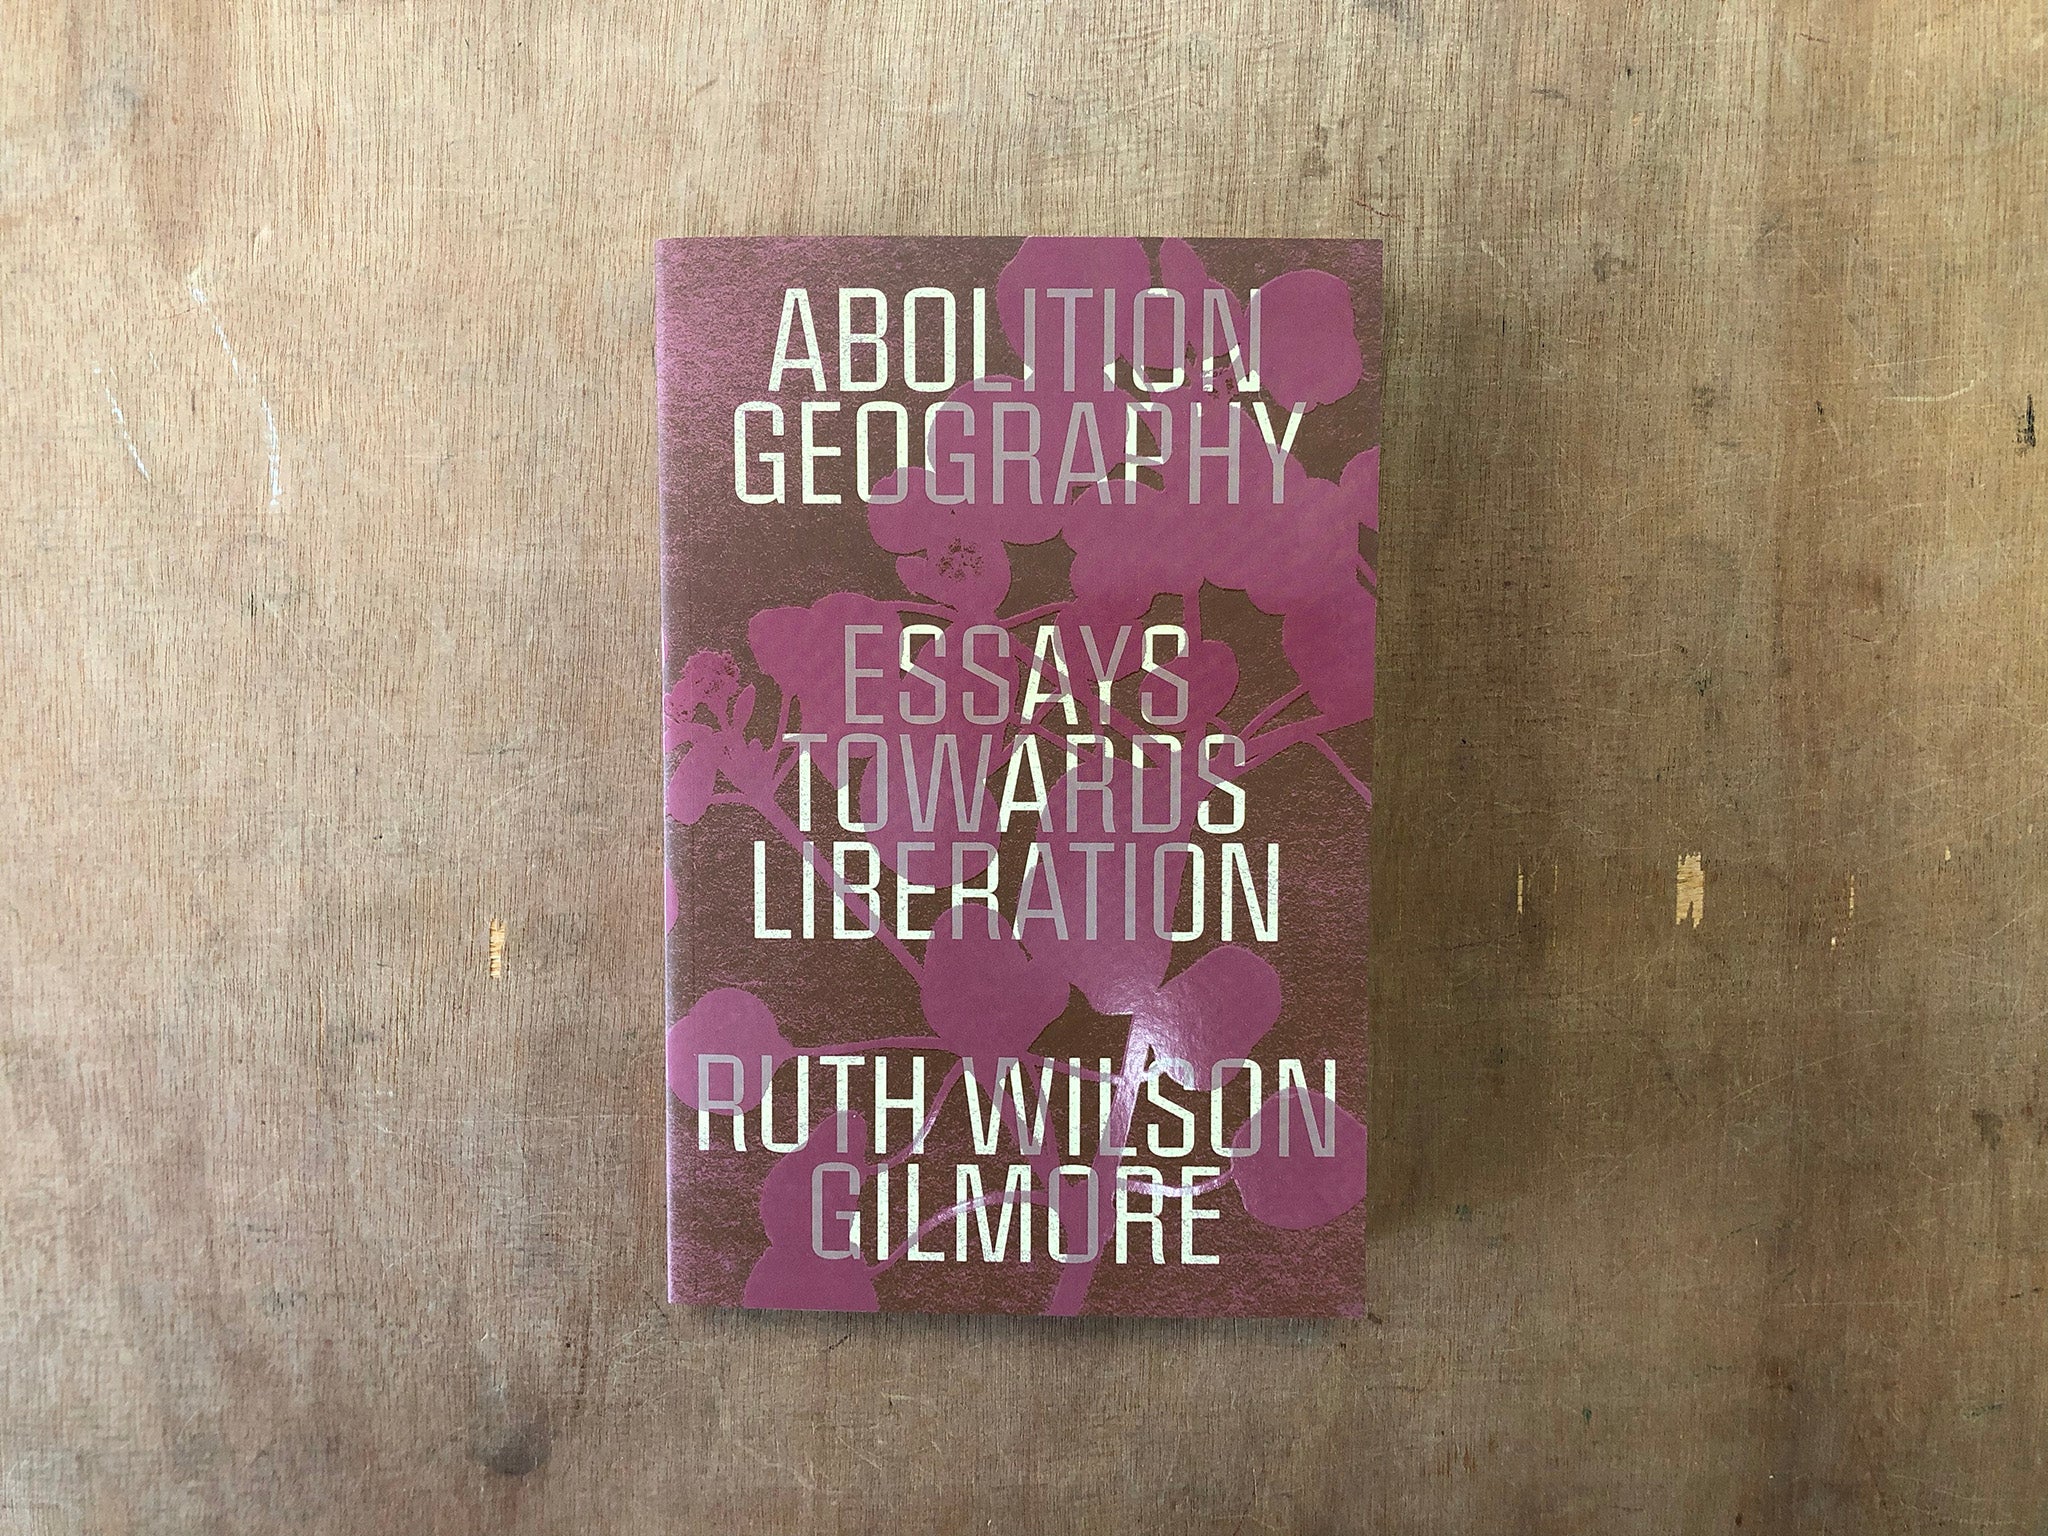 ABOLITION GEOGRAPHY: ESSAYS TOWARDS LIBERATION by Ruth Wilson Gilmore